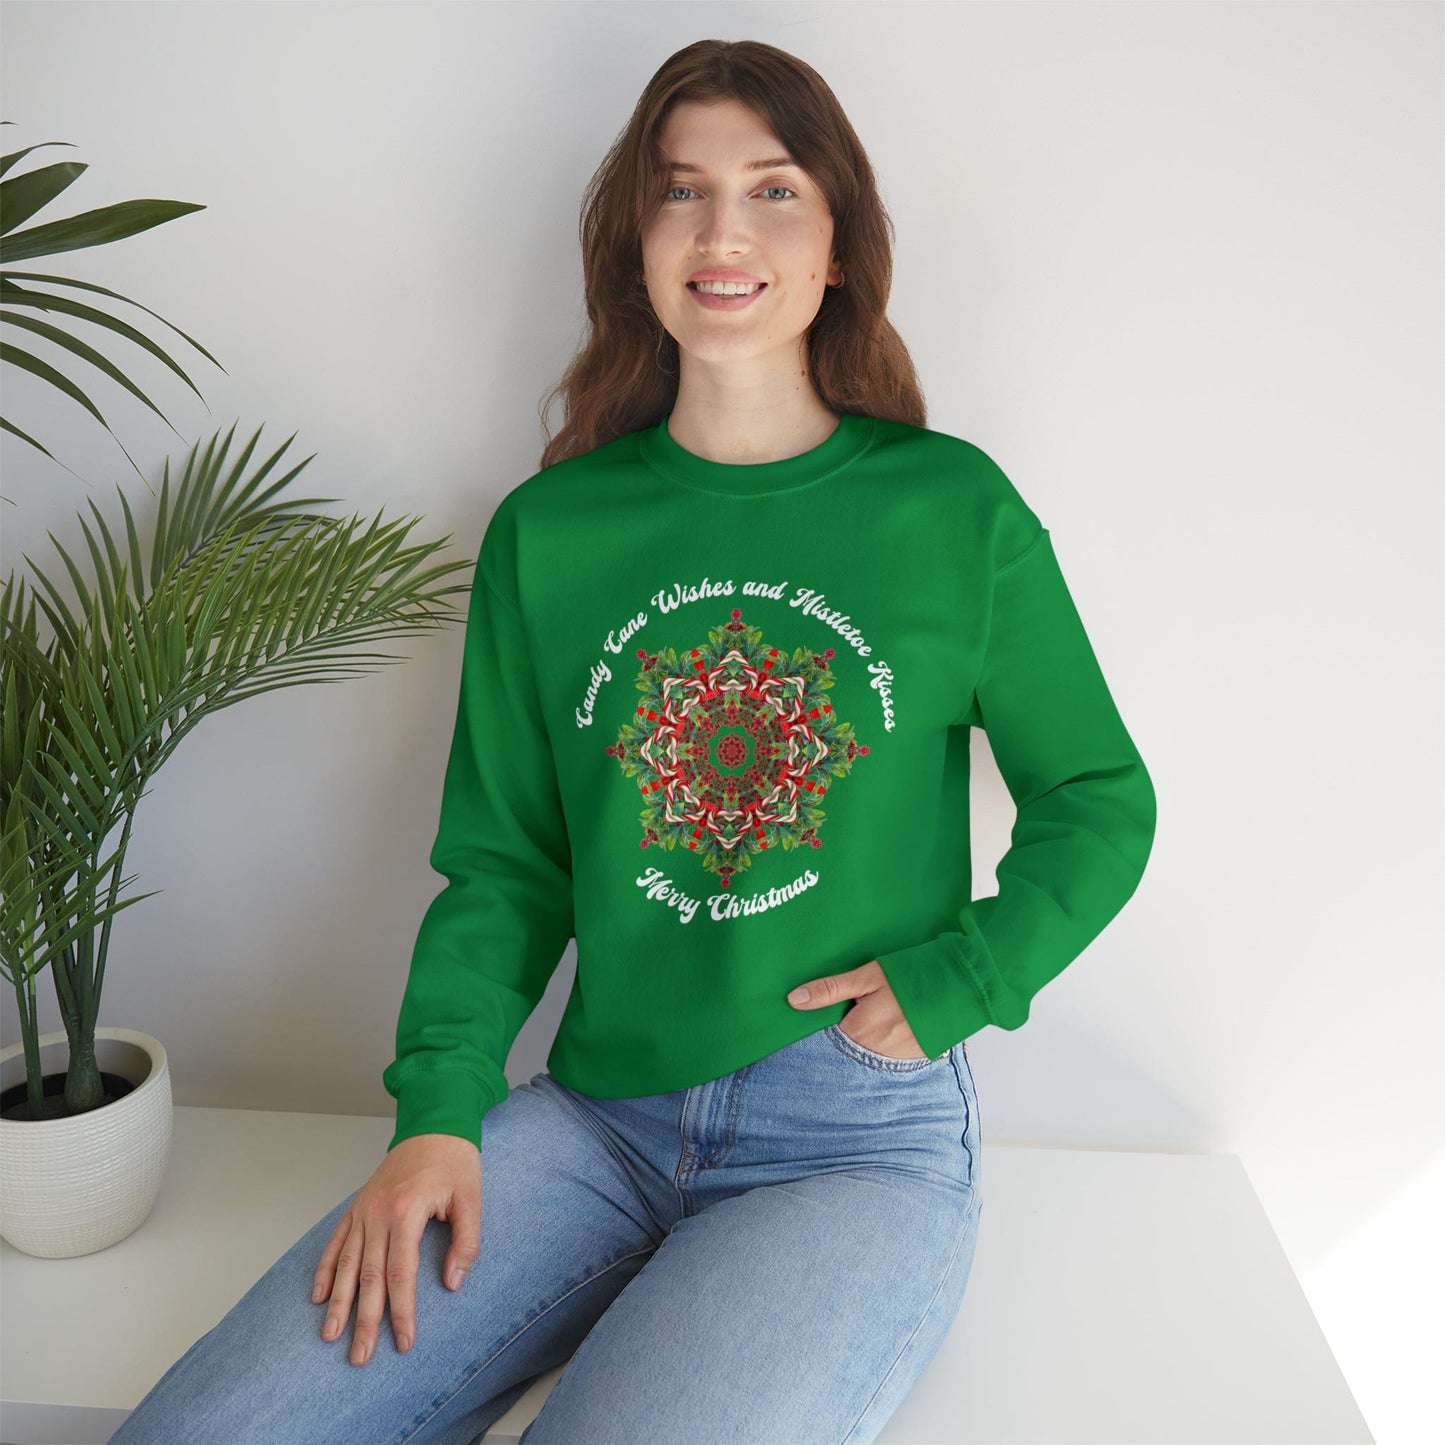 Merry Christmas Love Sweatshirt, Holiday Shirt with Candy Cane Mistletoe - Candy Cane Wishes and Mistletoe Kisses